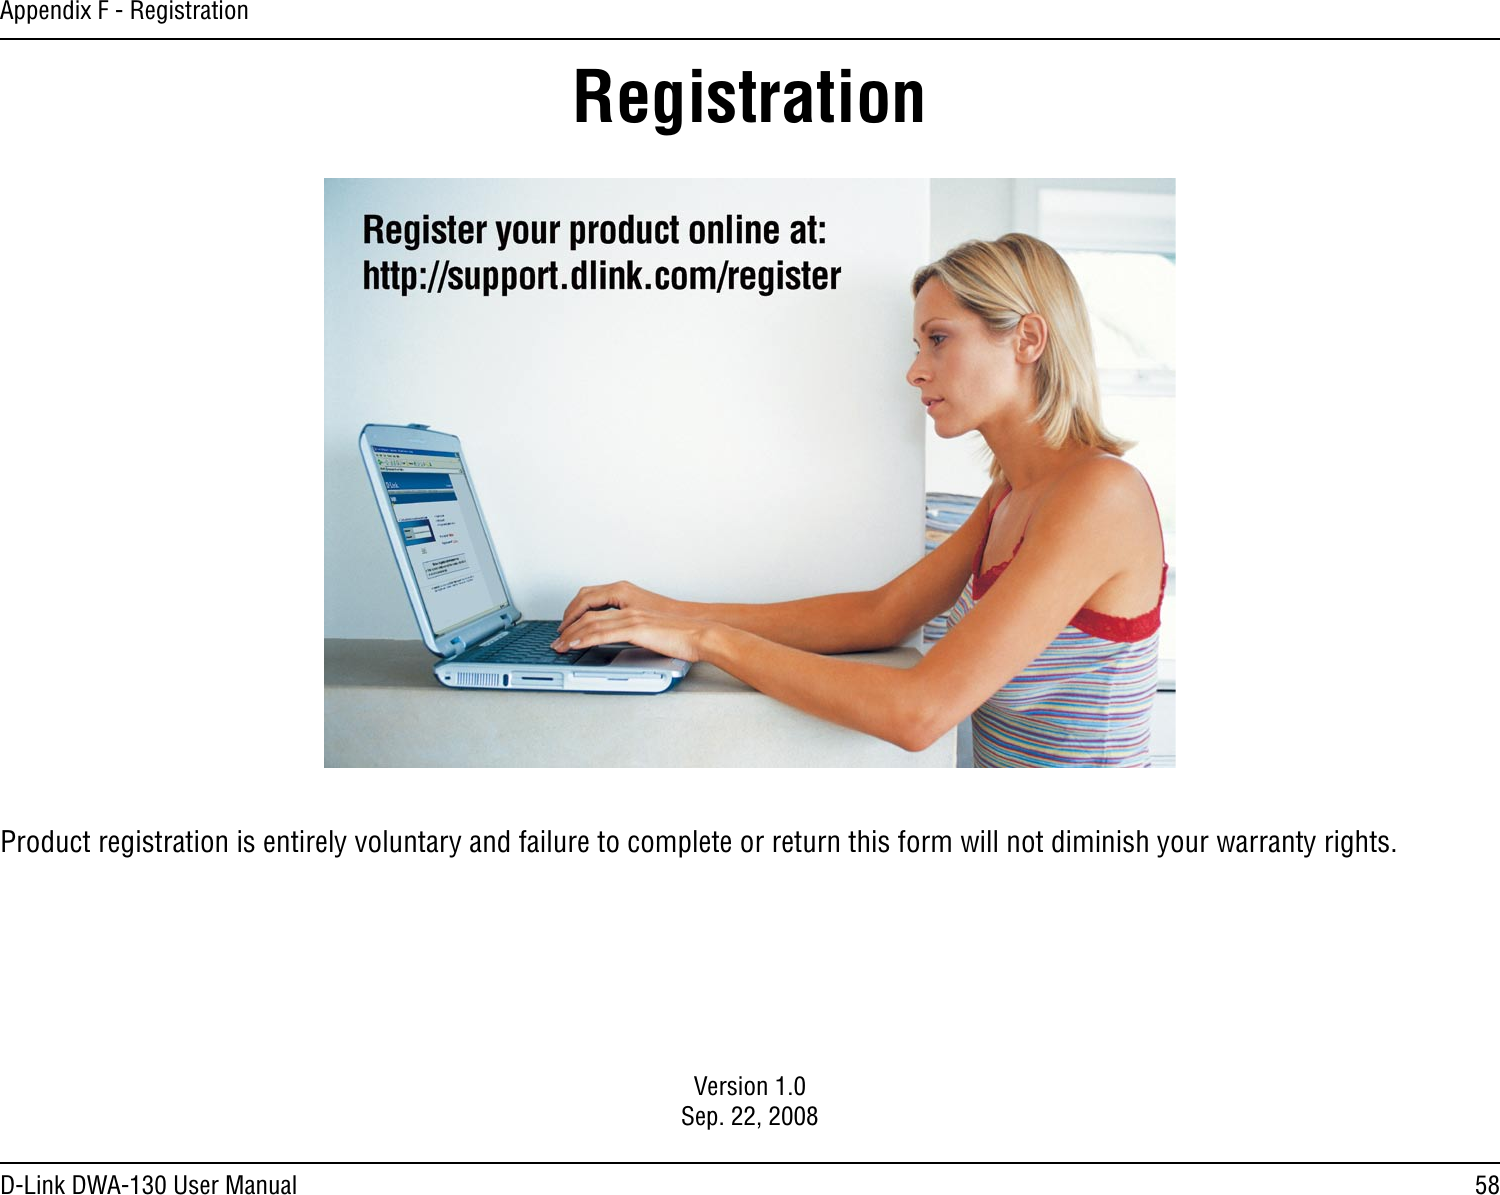 58D-Link DWA-130 User ManualAppendix F - RegistrationVersion 1.0Sep. 22, 2008Product registration is entirely voluntary and failure to complete or return this form will not diminish your warranty rights.Registration